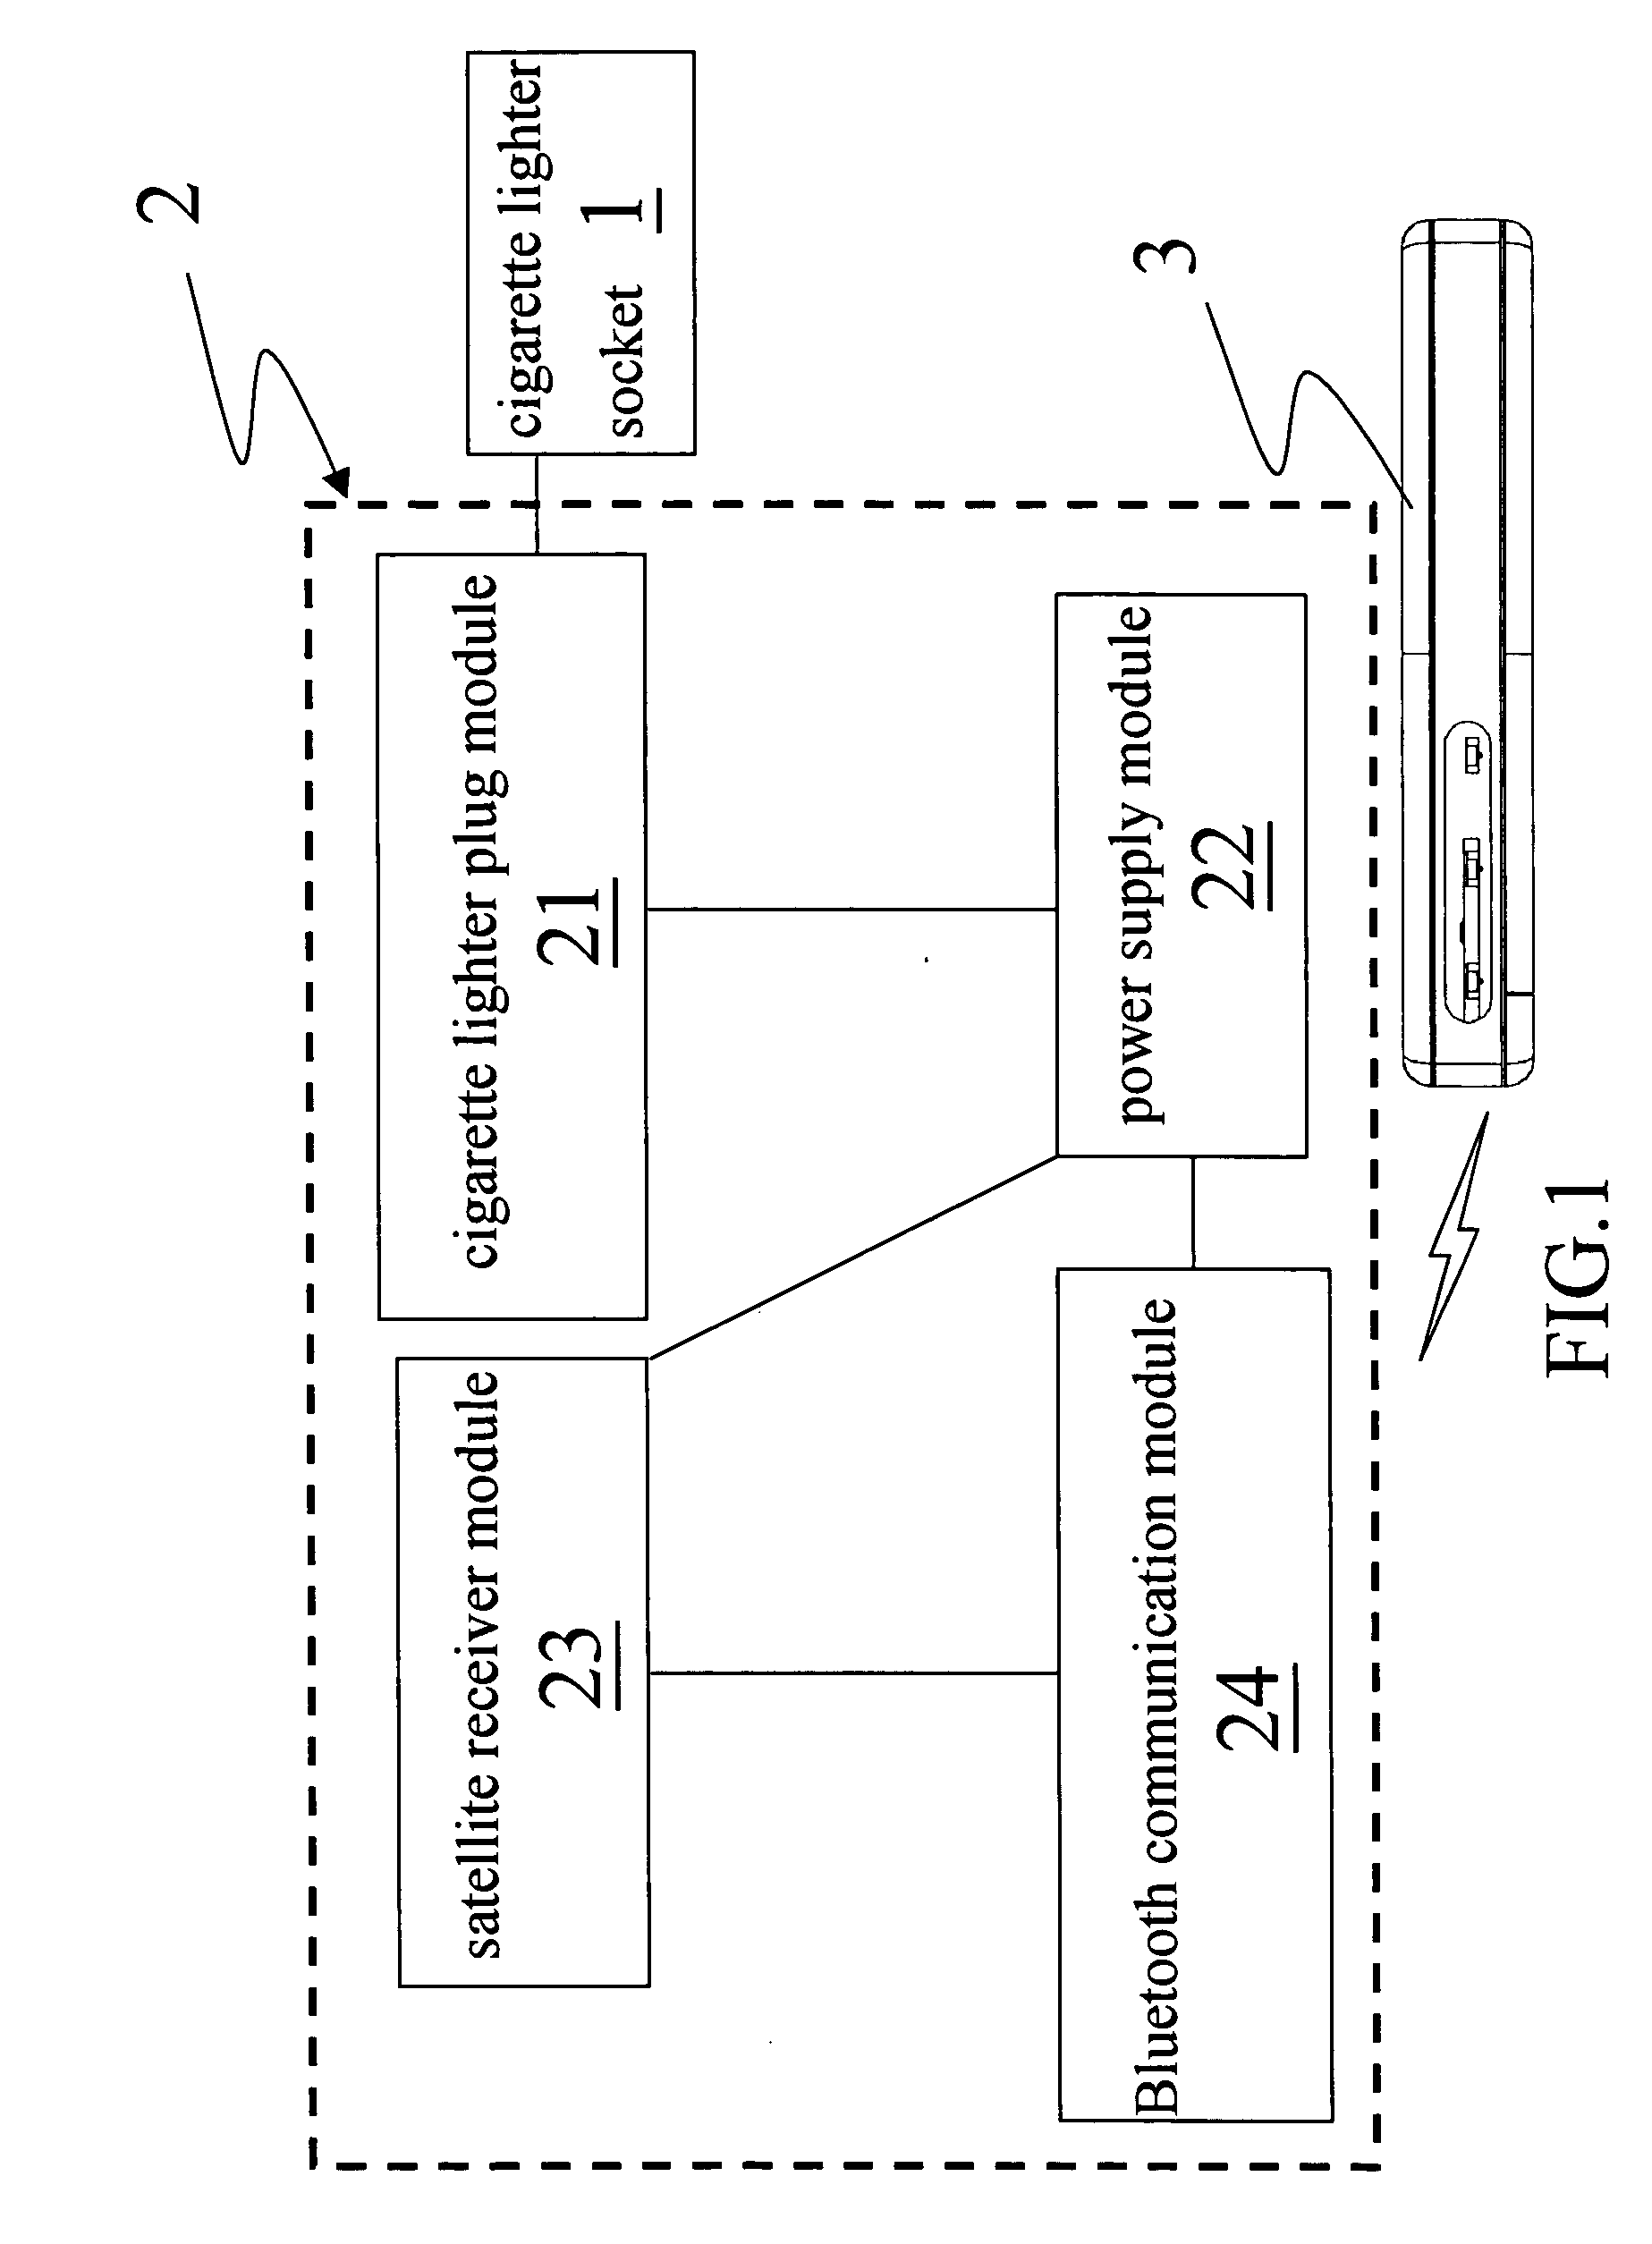 Bluetooth satellite receiver device powered by a cigarette lighter socket